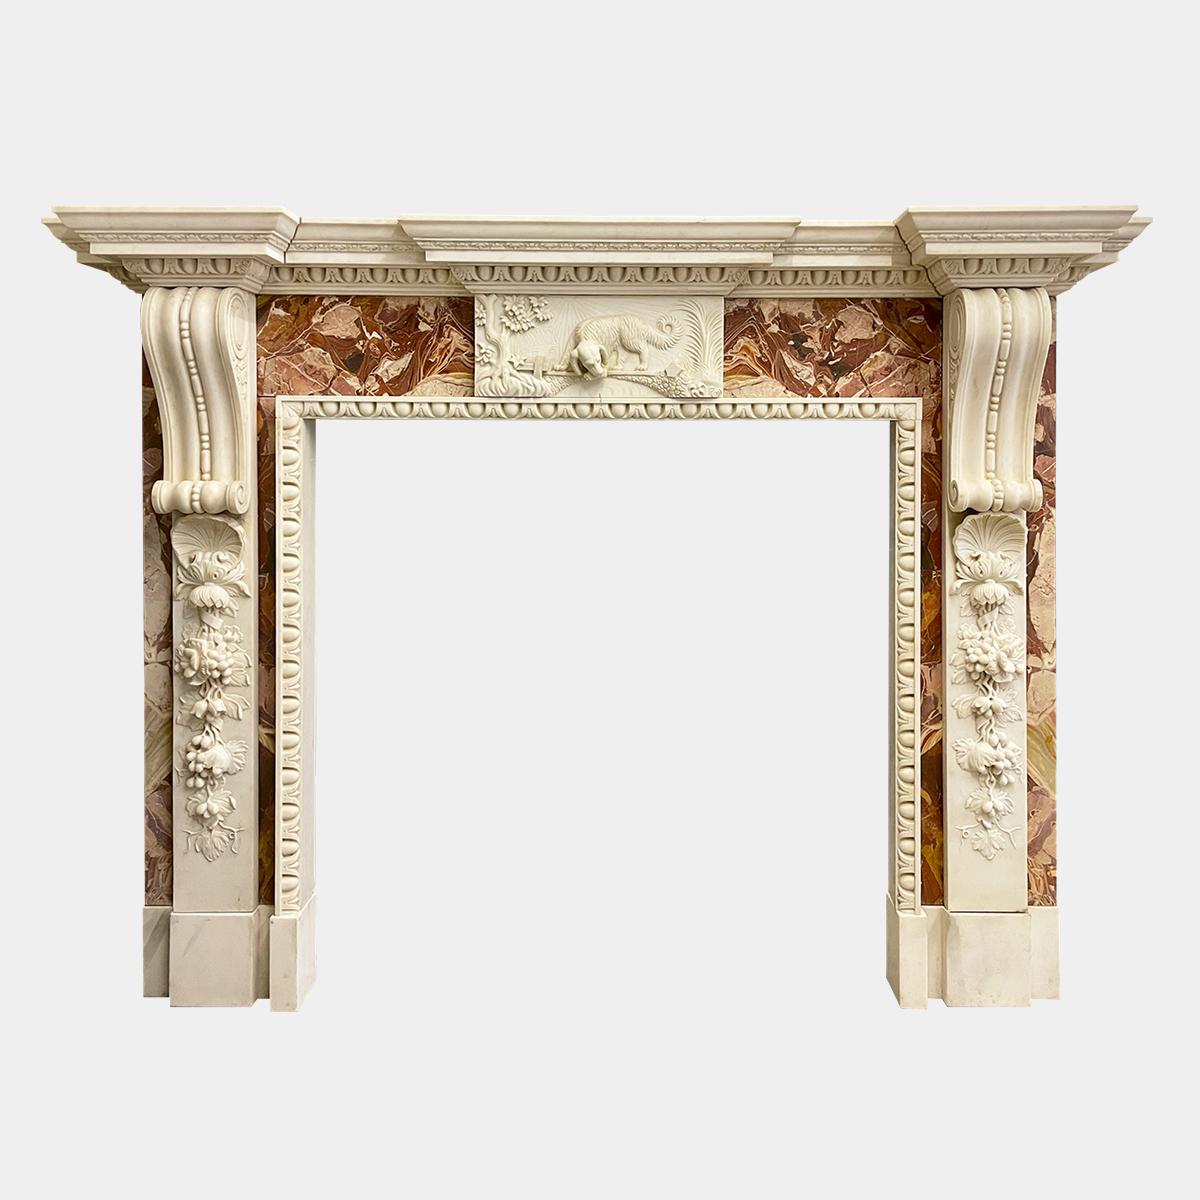 A substantial and very good quality copy of an 18th century Irish fireplace. An abundant use of Italian Jasper marble with white marble carved vines and foliage adorning the jambs. Egg and dart moulded interior slips and along the under moulding of